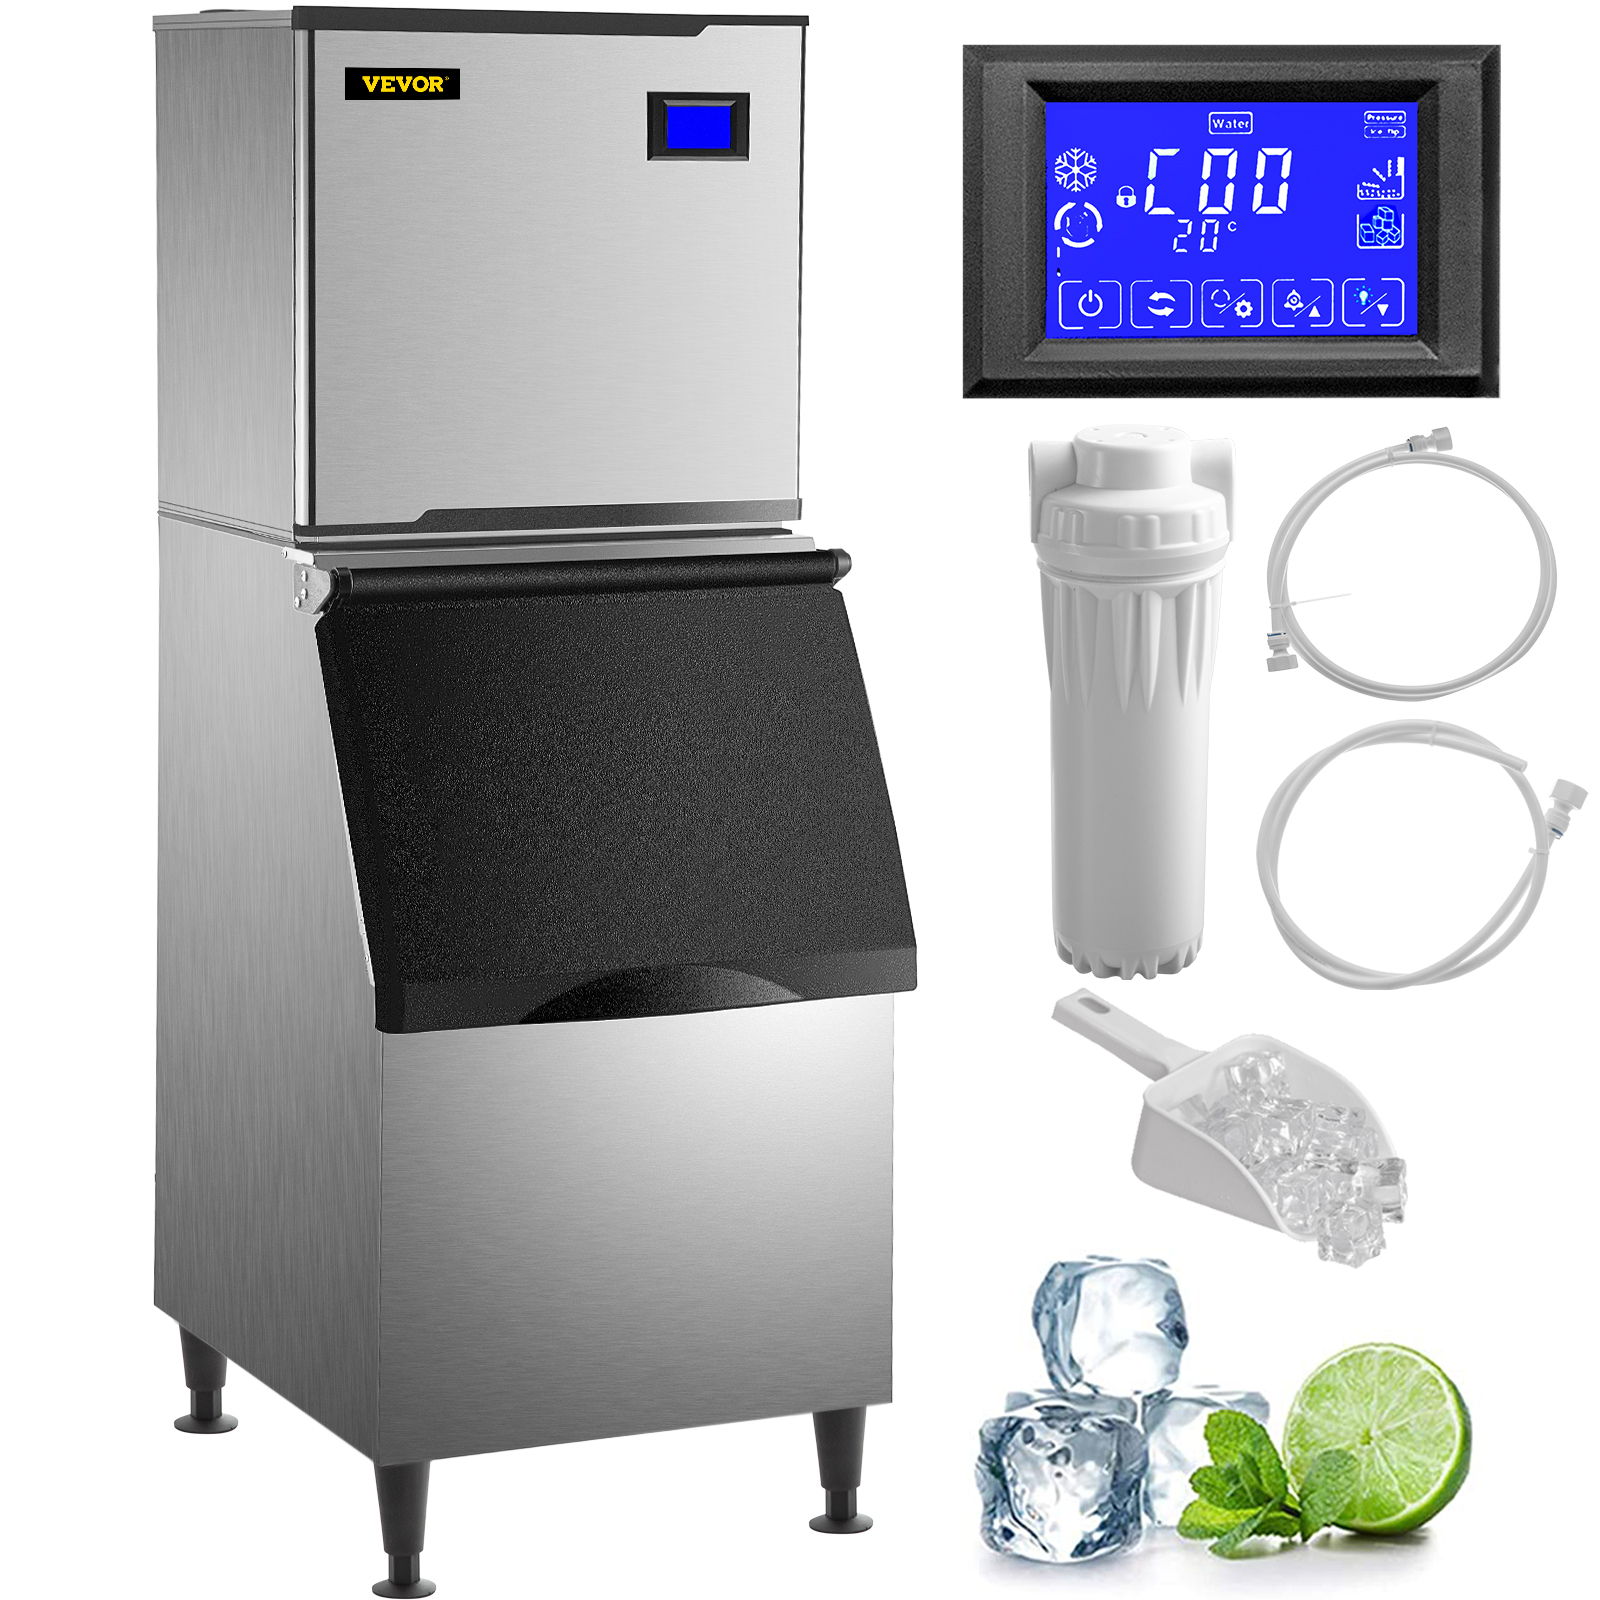 110 LBS VEVOR 2 in 1 Commercial Ice Maker with Water Dispenser 110LBS in 24 Hrs 14LBS Storage 45 Cubes in One Cycle W/Scoop Perfect for Home Office Snack Bar 